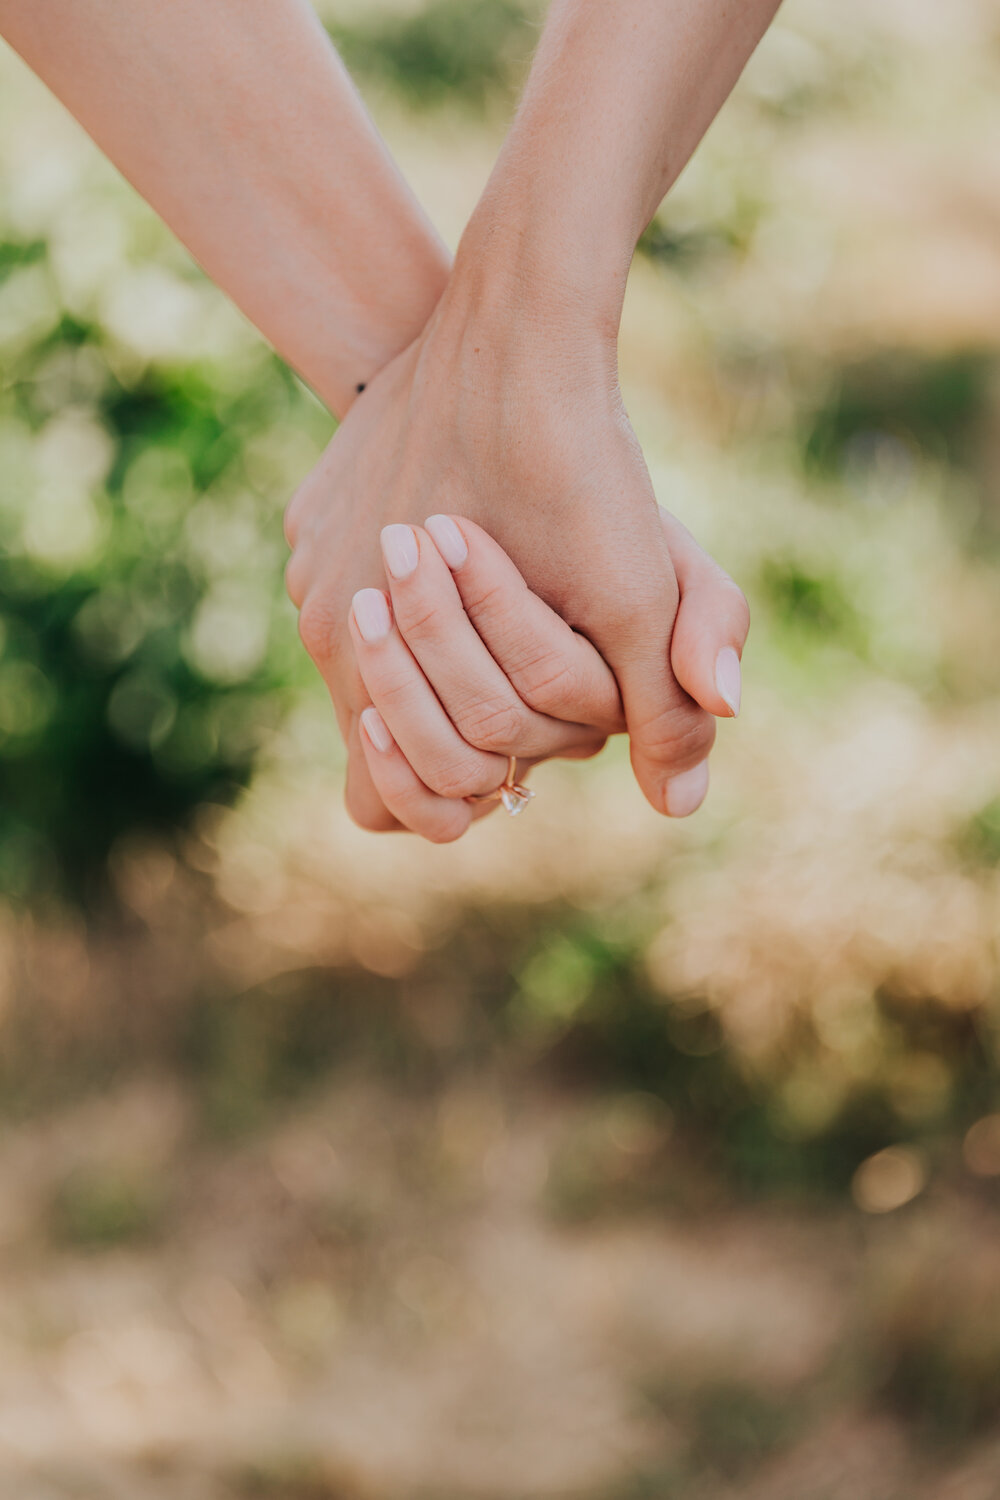 Pictured here are two people holding hands in front of a bright green background. Only the hands of the folx are visible.